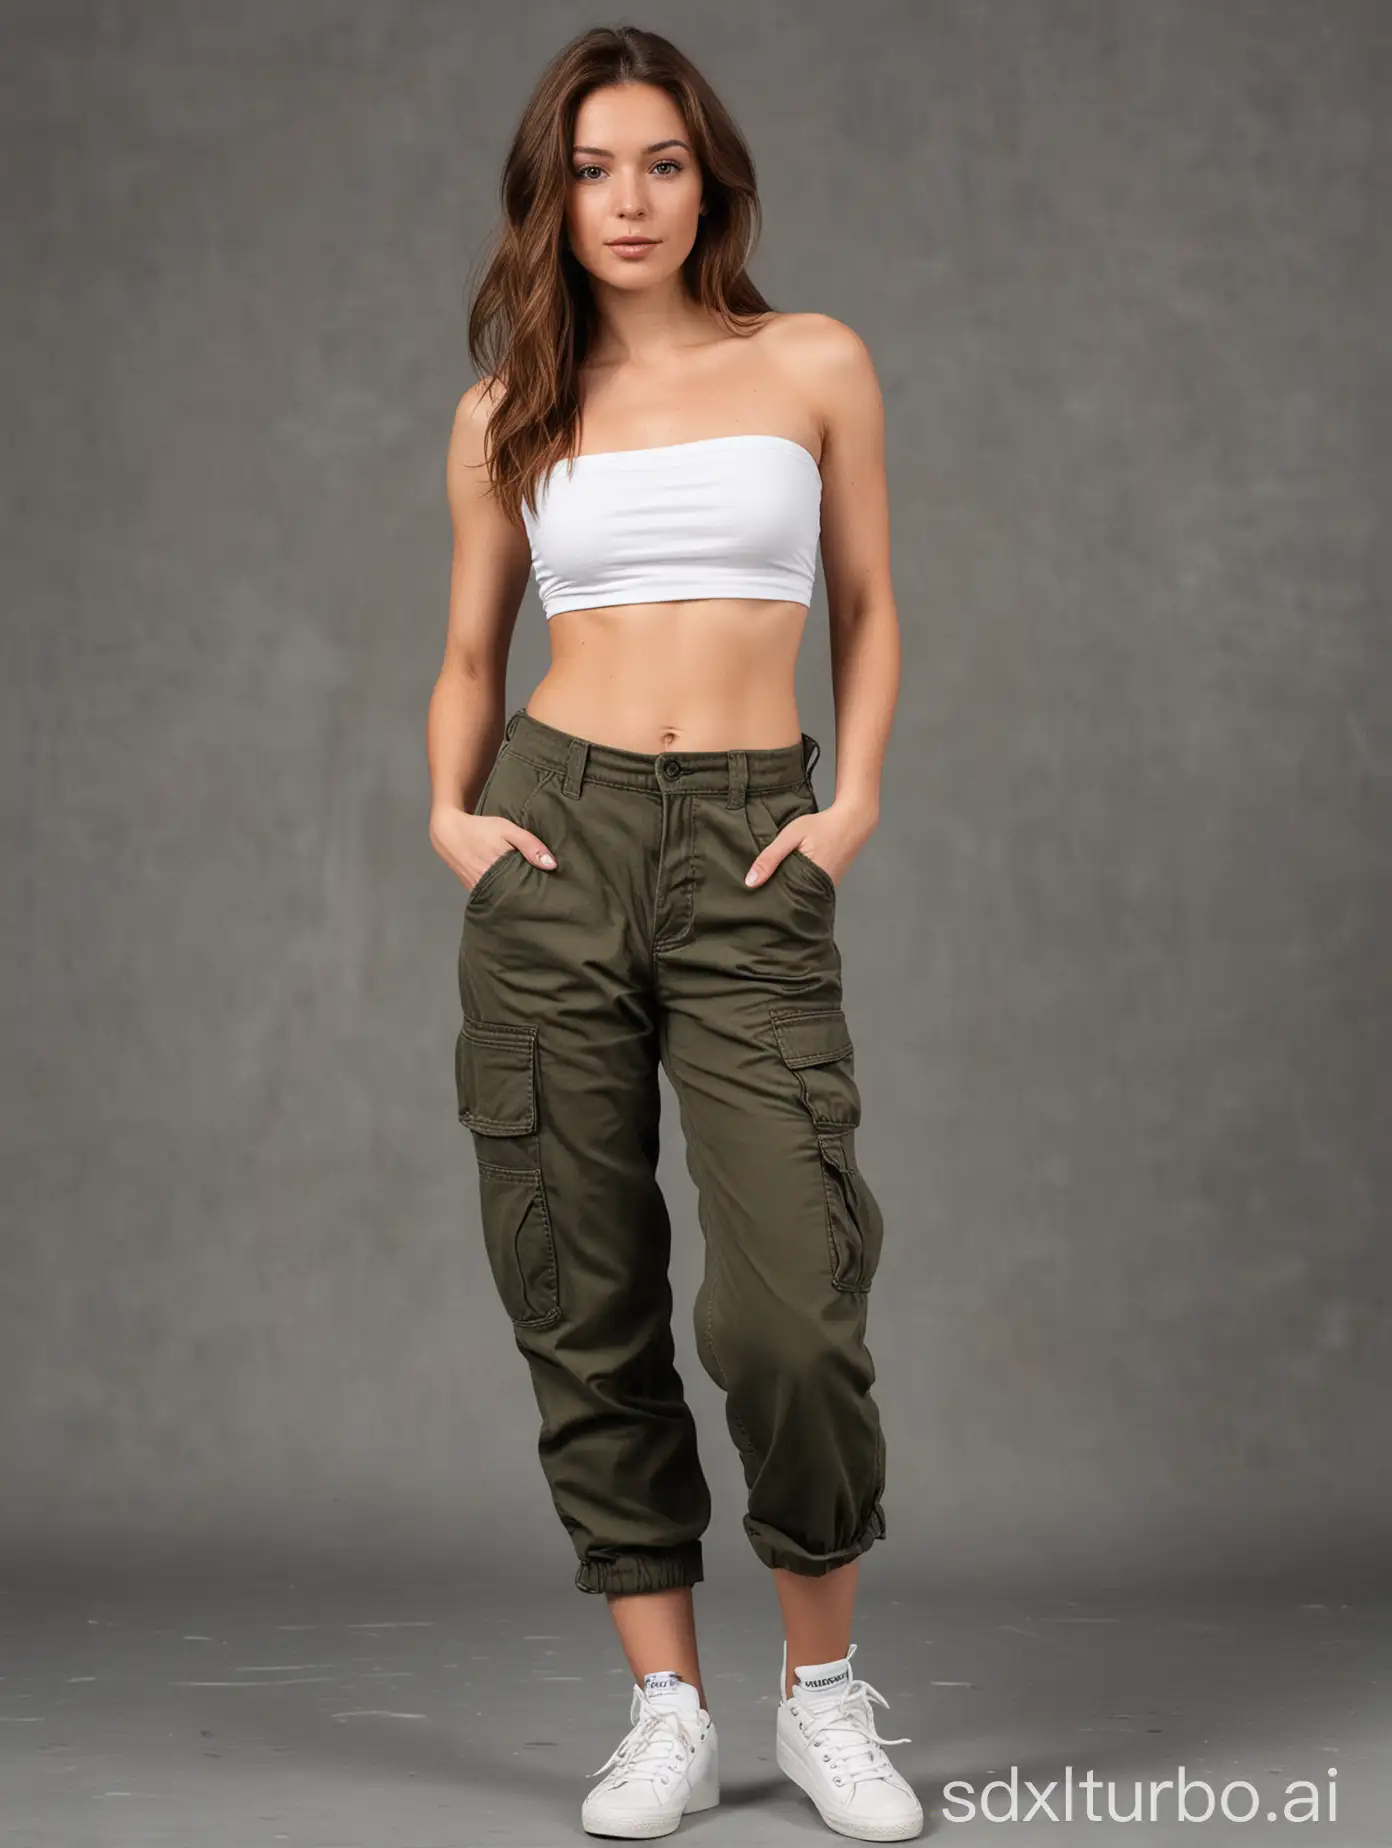 Stylish-Woman-in-Black-Bandeau-and-Cargo-Pants-with-White-Sneakers